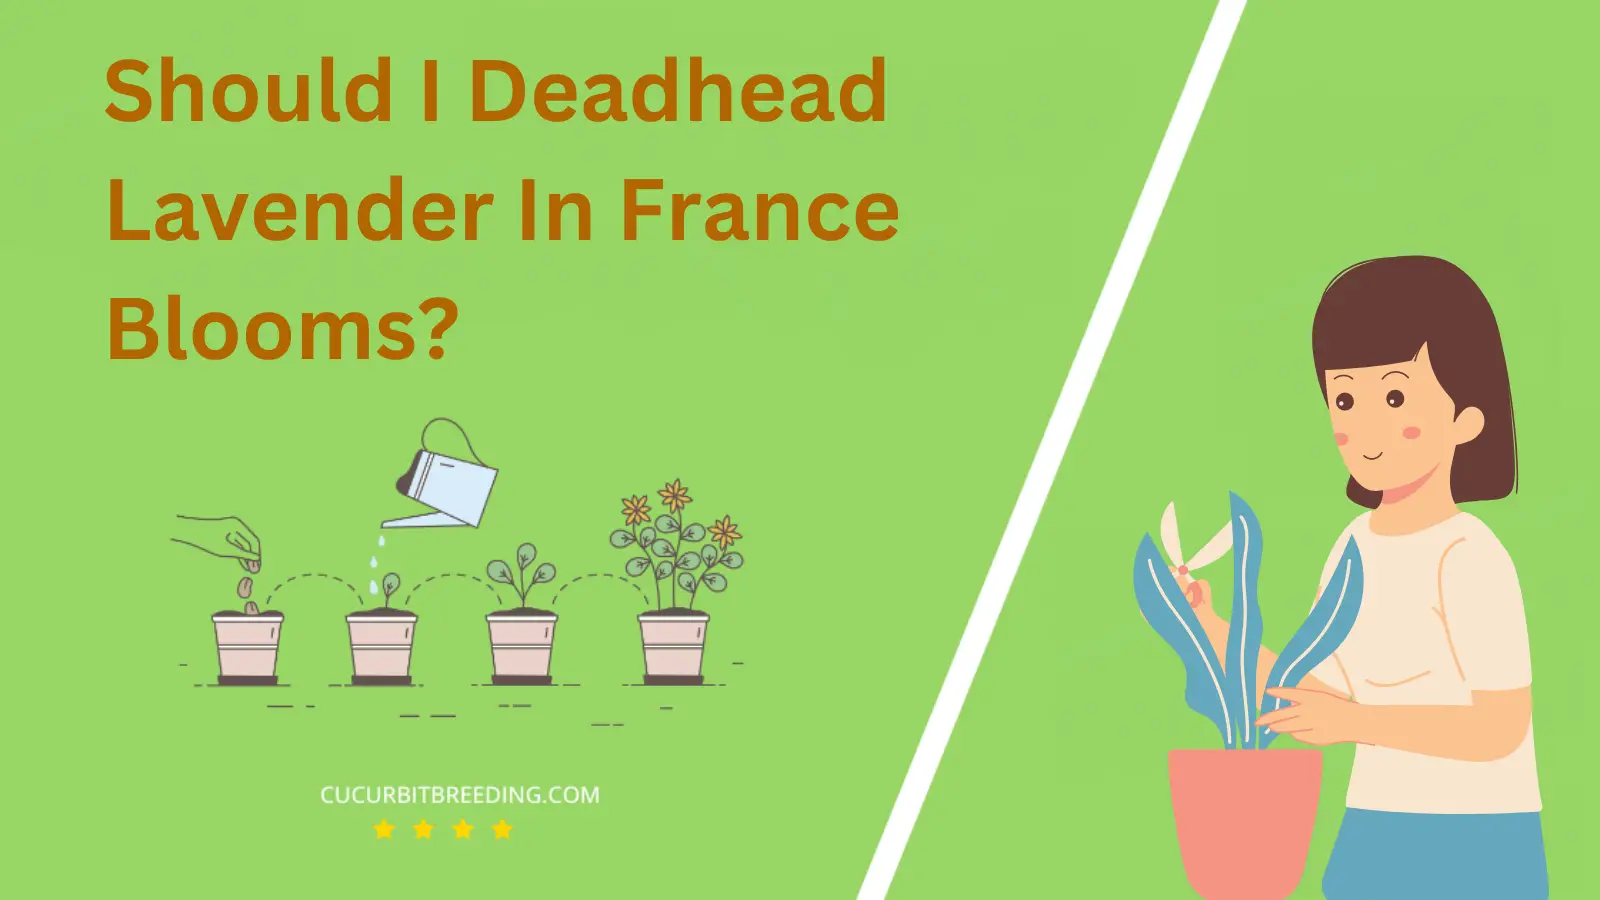 Should I Deadhead Lavender In France Blooms?